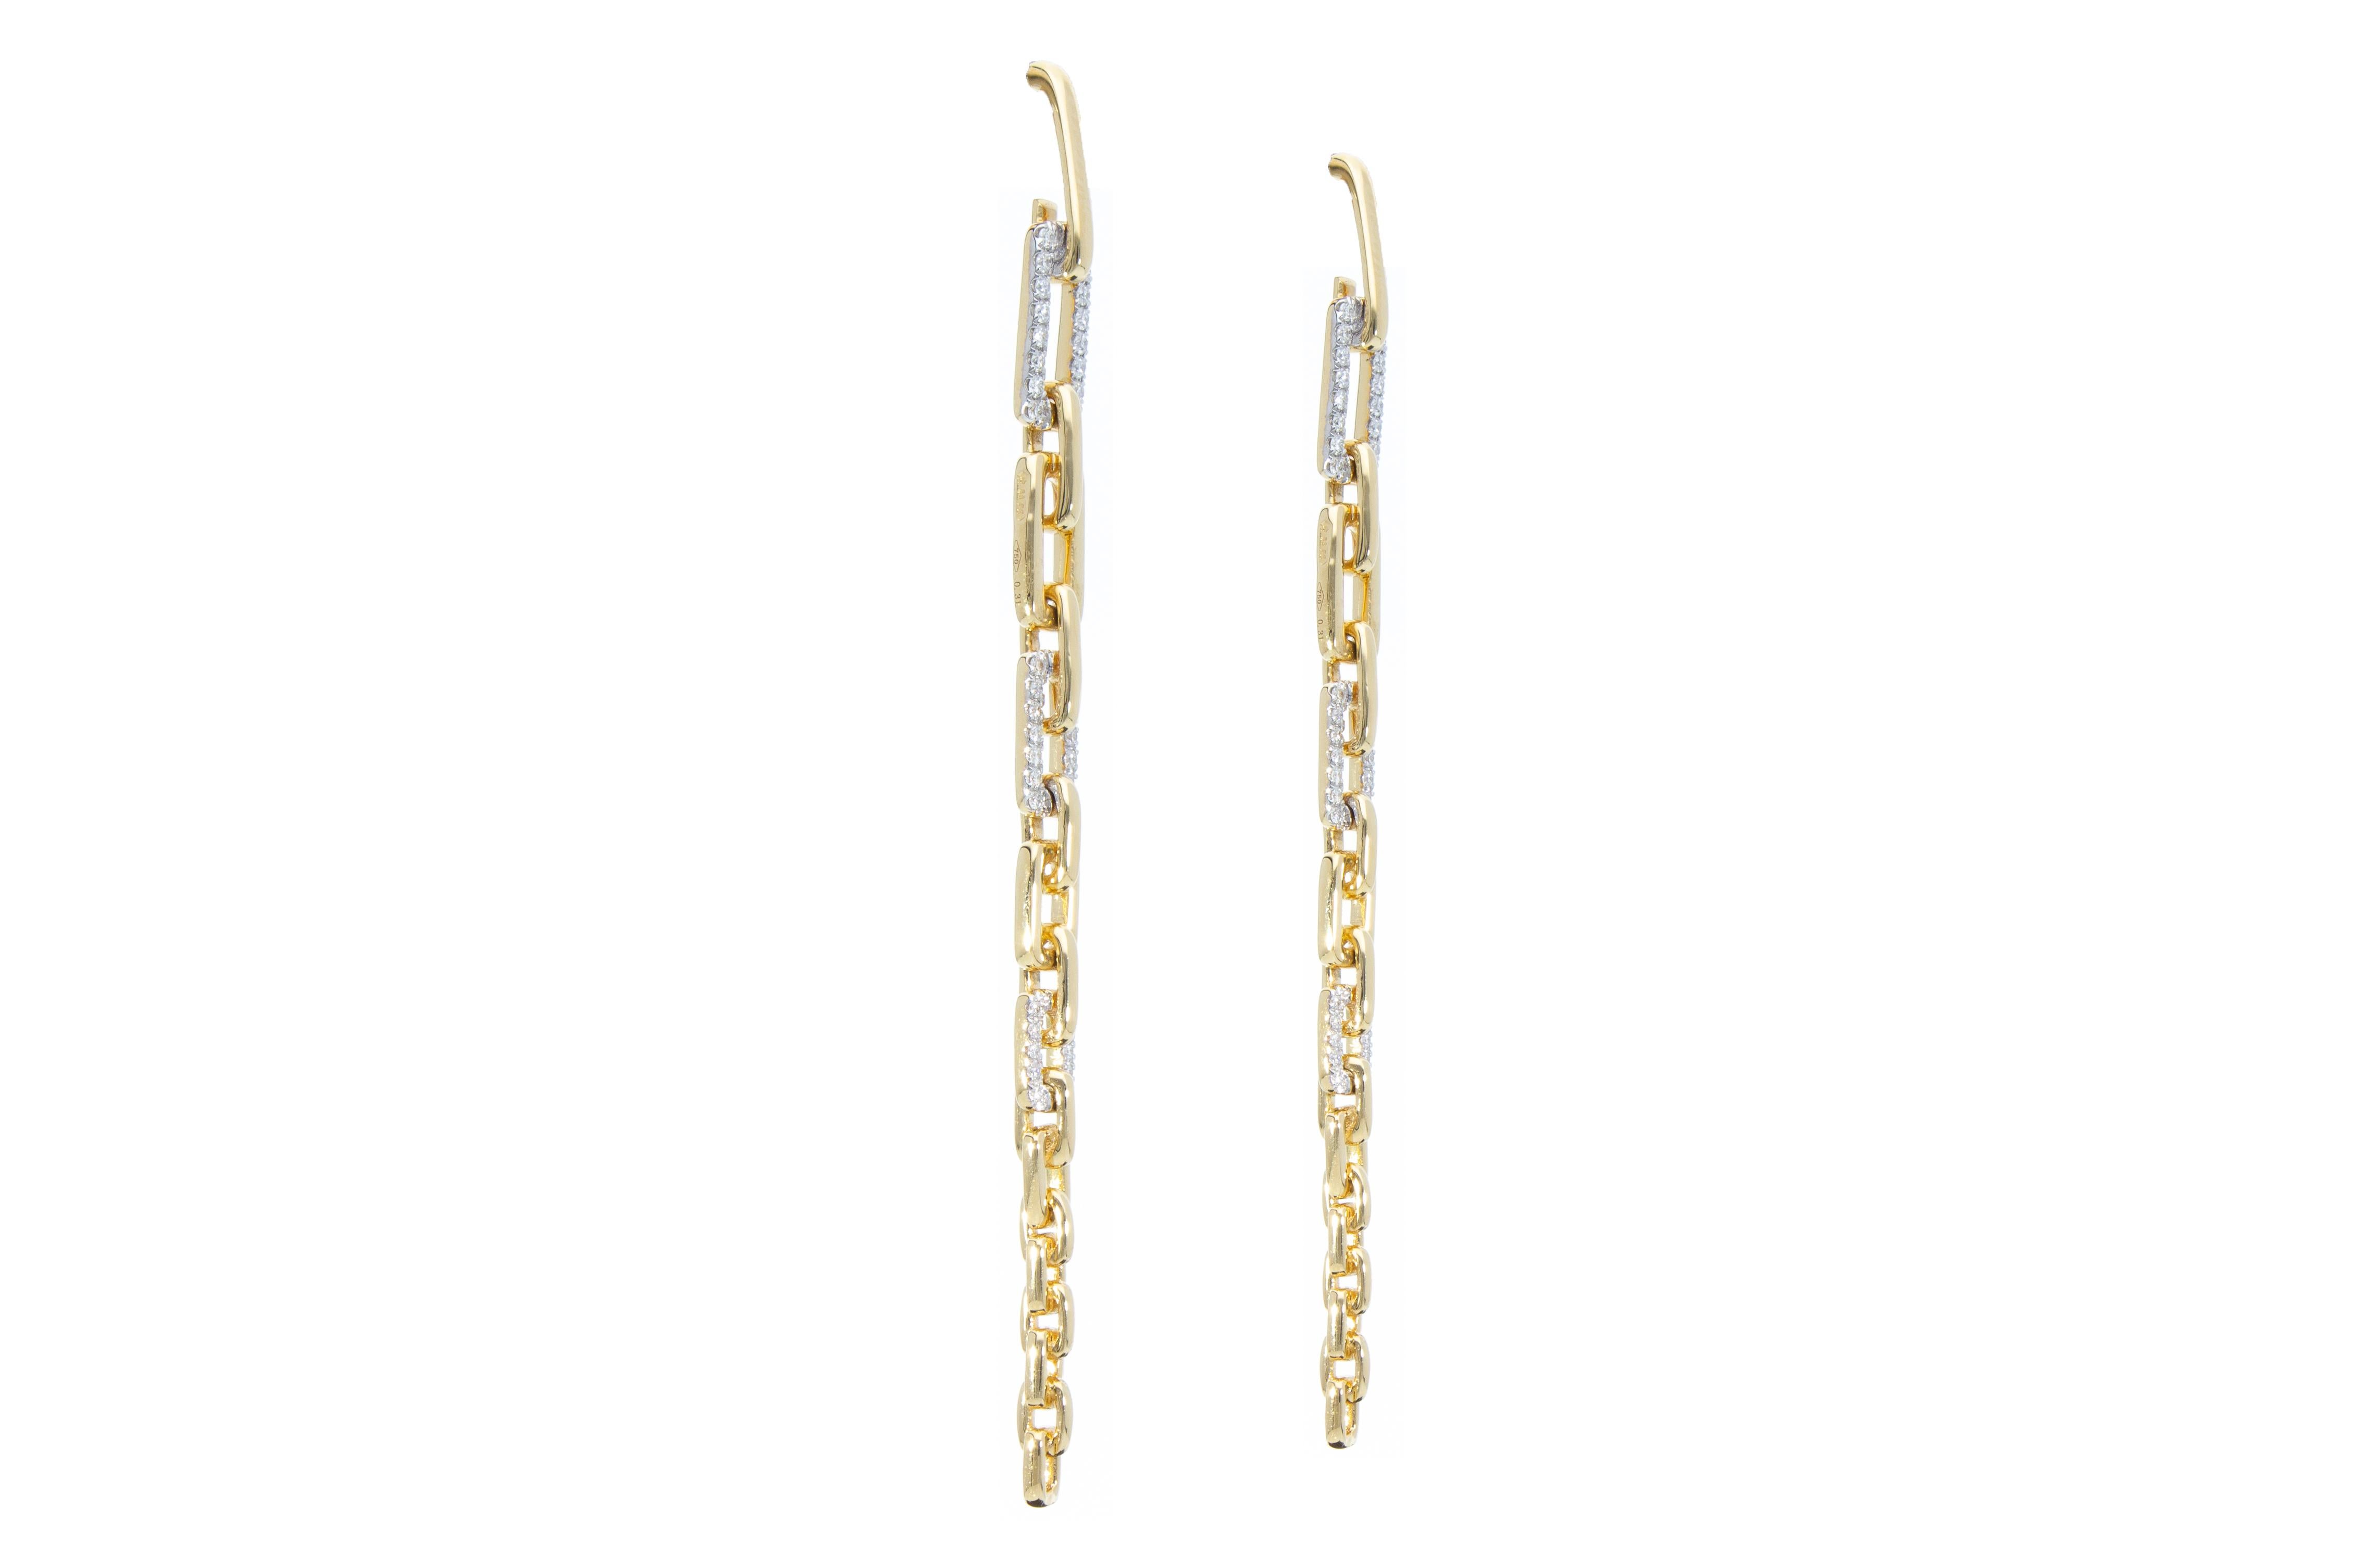 Diamonds Ct 0.35 Pendant Earrings with Rectangular Links 18k Gold Made in Italy For Sale 4